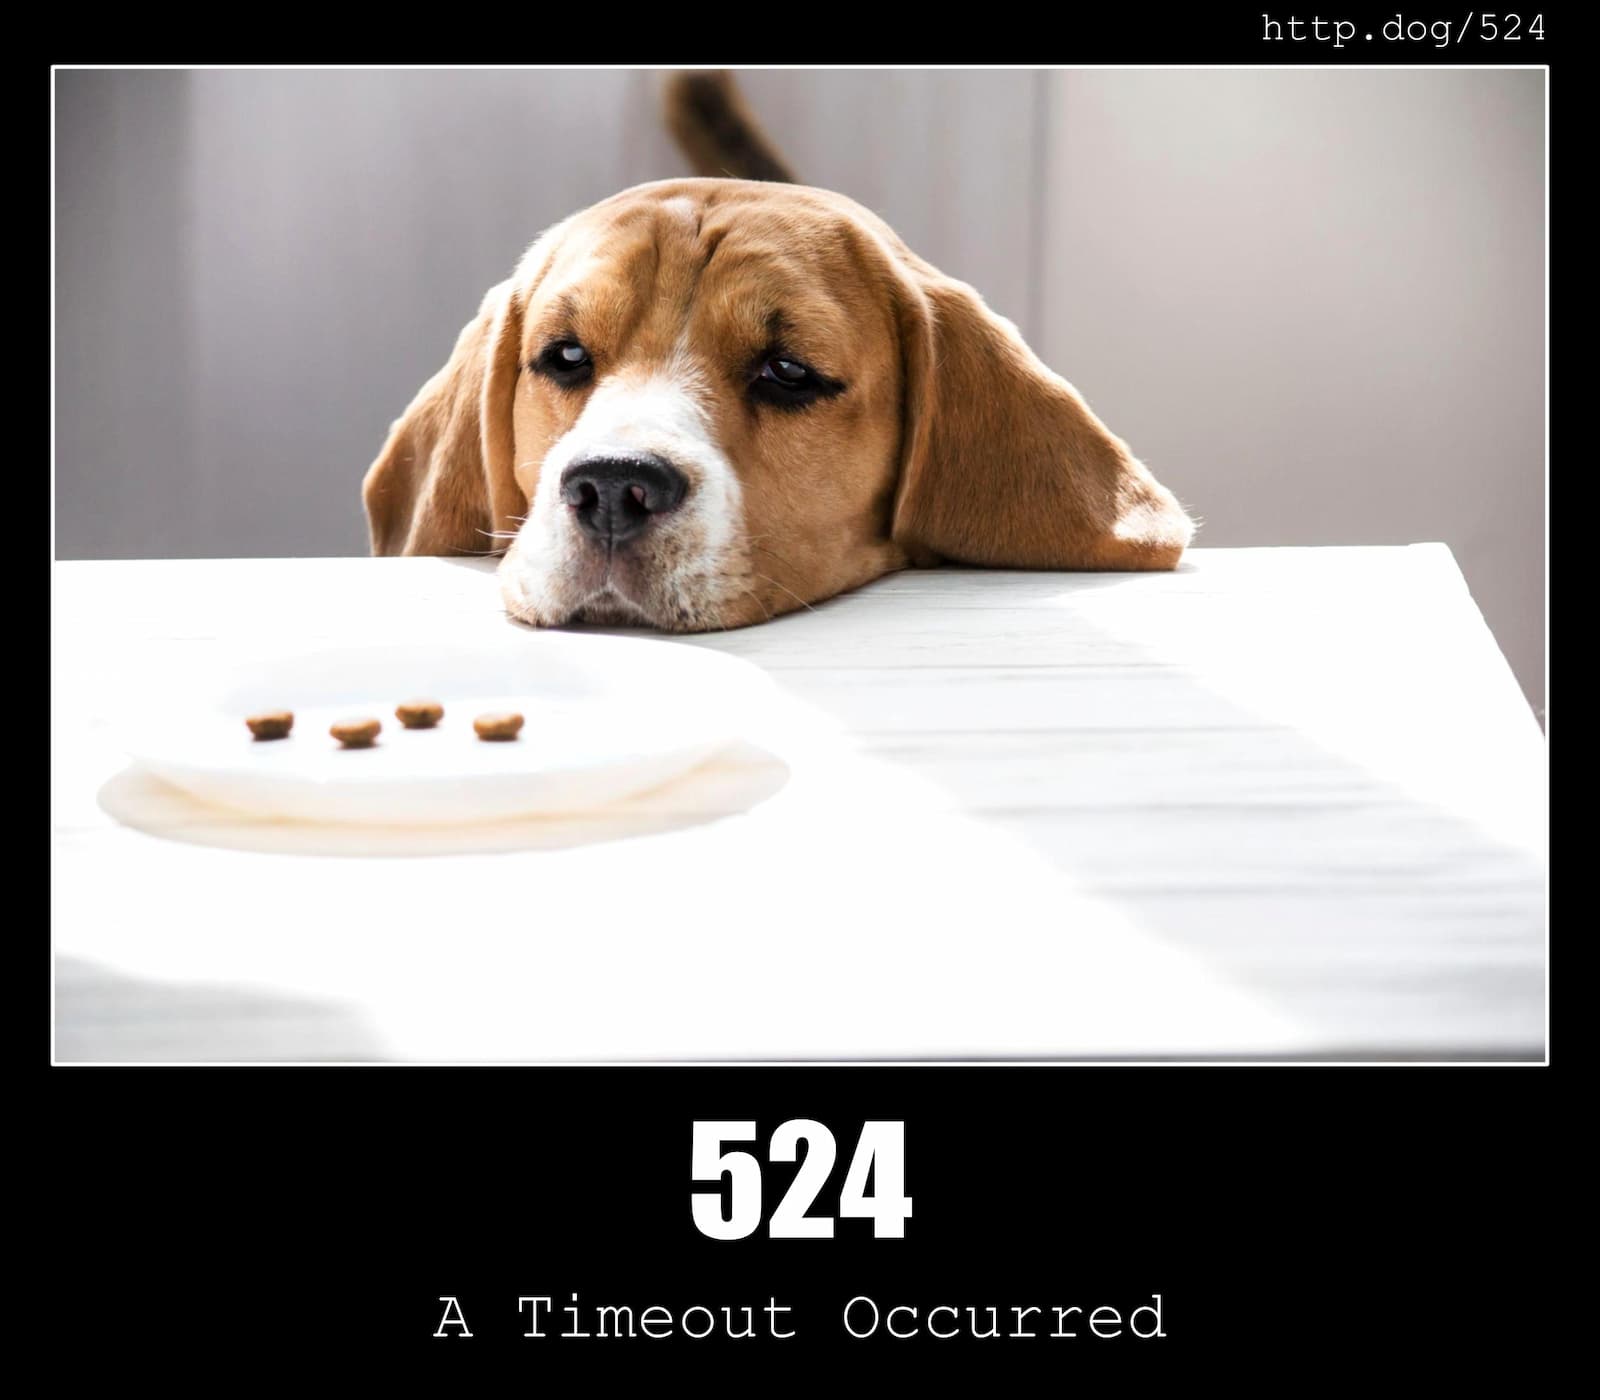 HTTP Status Code 524 A Timeout Occurred